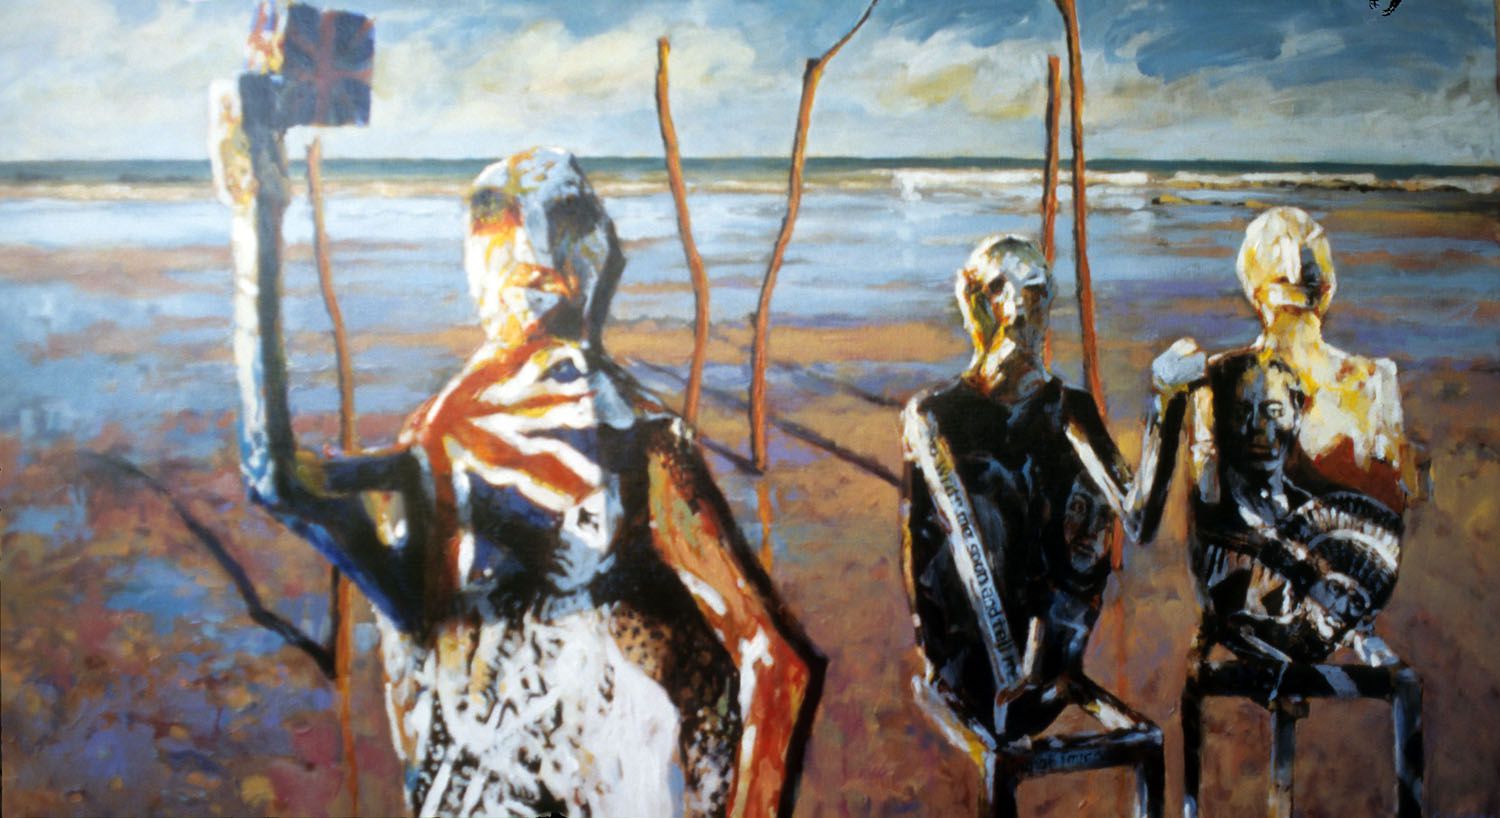 "Negotiation of the Guardians" 1996. Acrylic on linen. 82 x 150cm